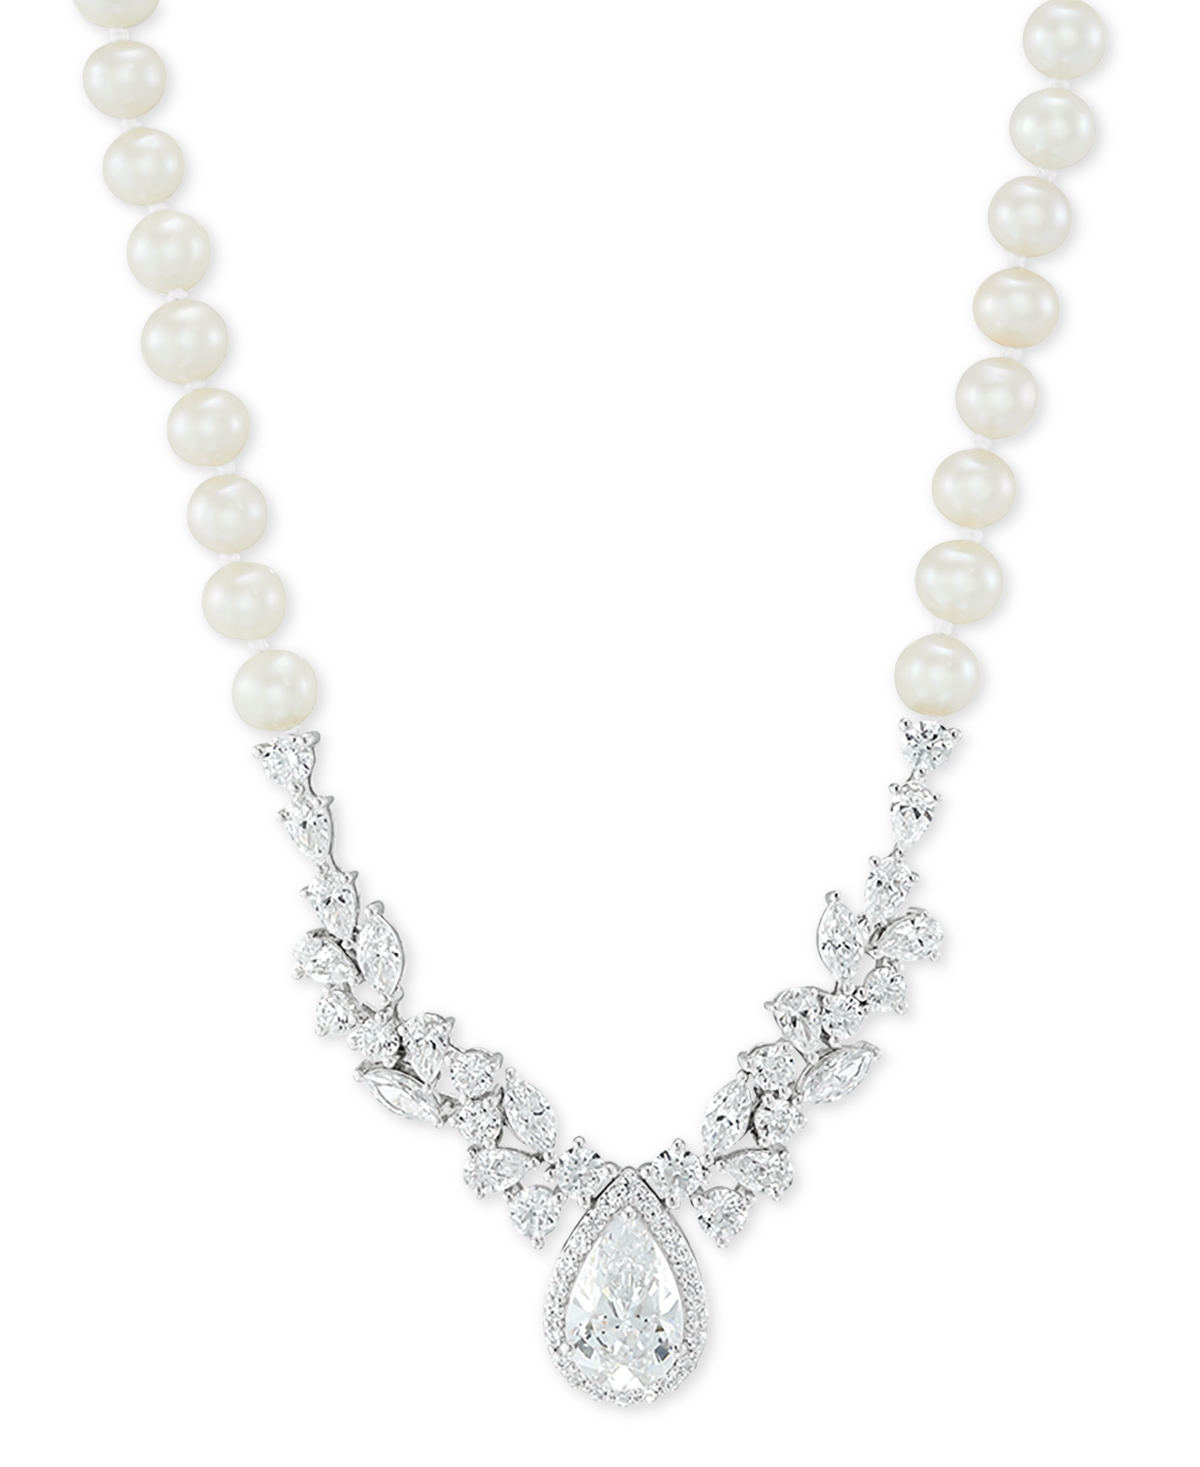 ARABELLA CULTURED FRESHWATER PEARL (5-6MM) CUBIC ZIRCONIA 17" STATEMENT NECKLACE IN STERLING SILVER